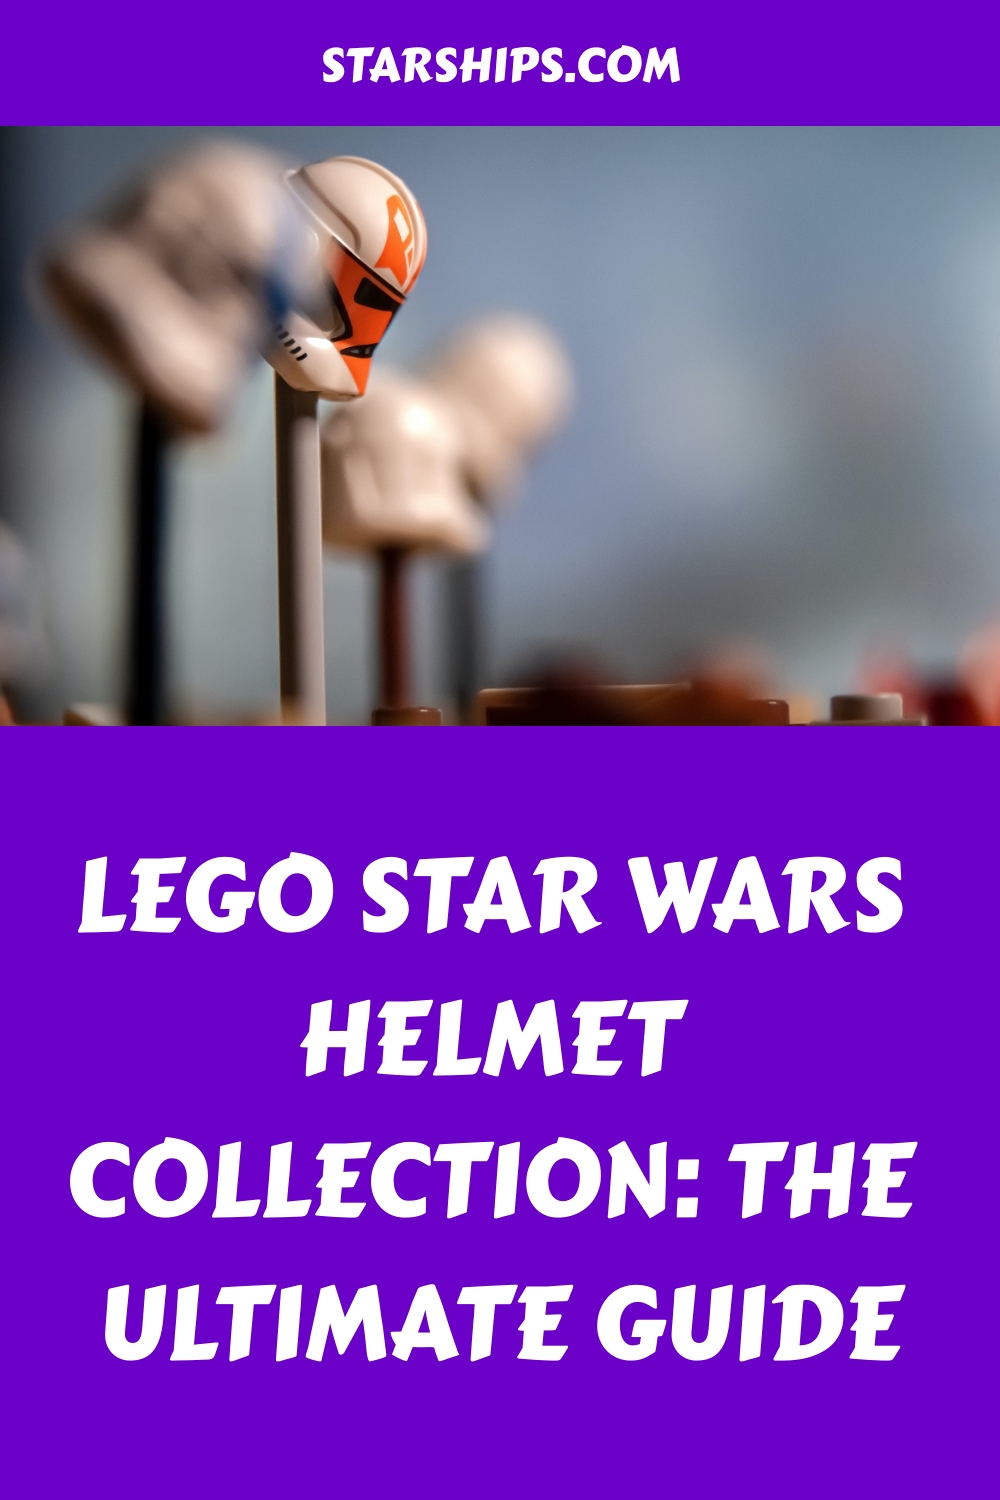 Lego Star Wars Helmet Collection The Ultimate Guide generated pin 561440